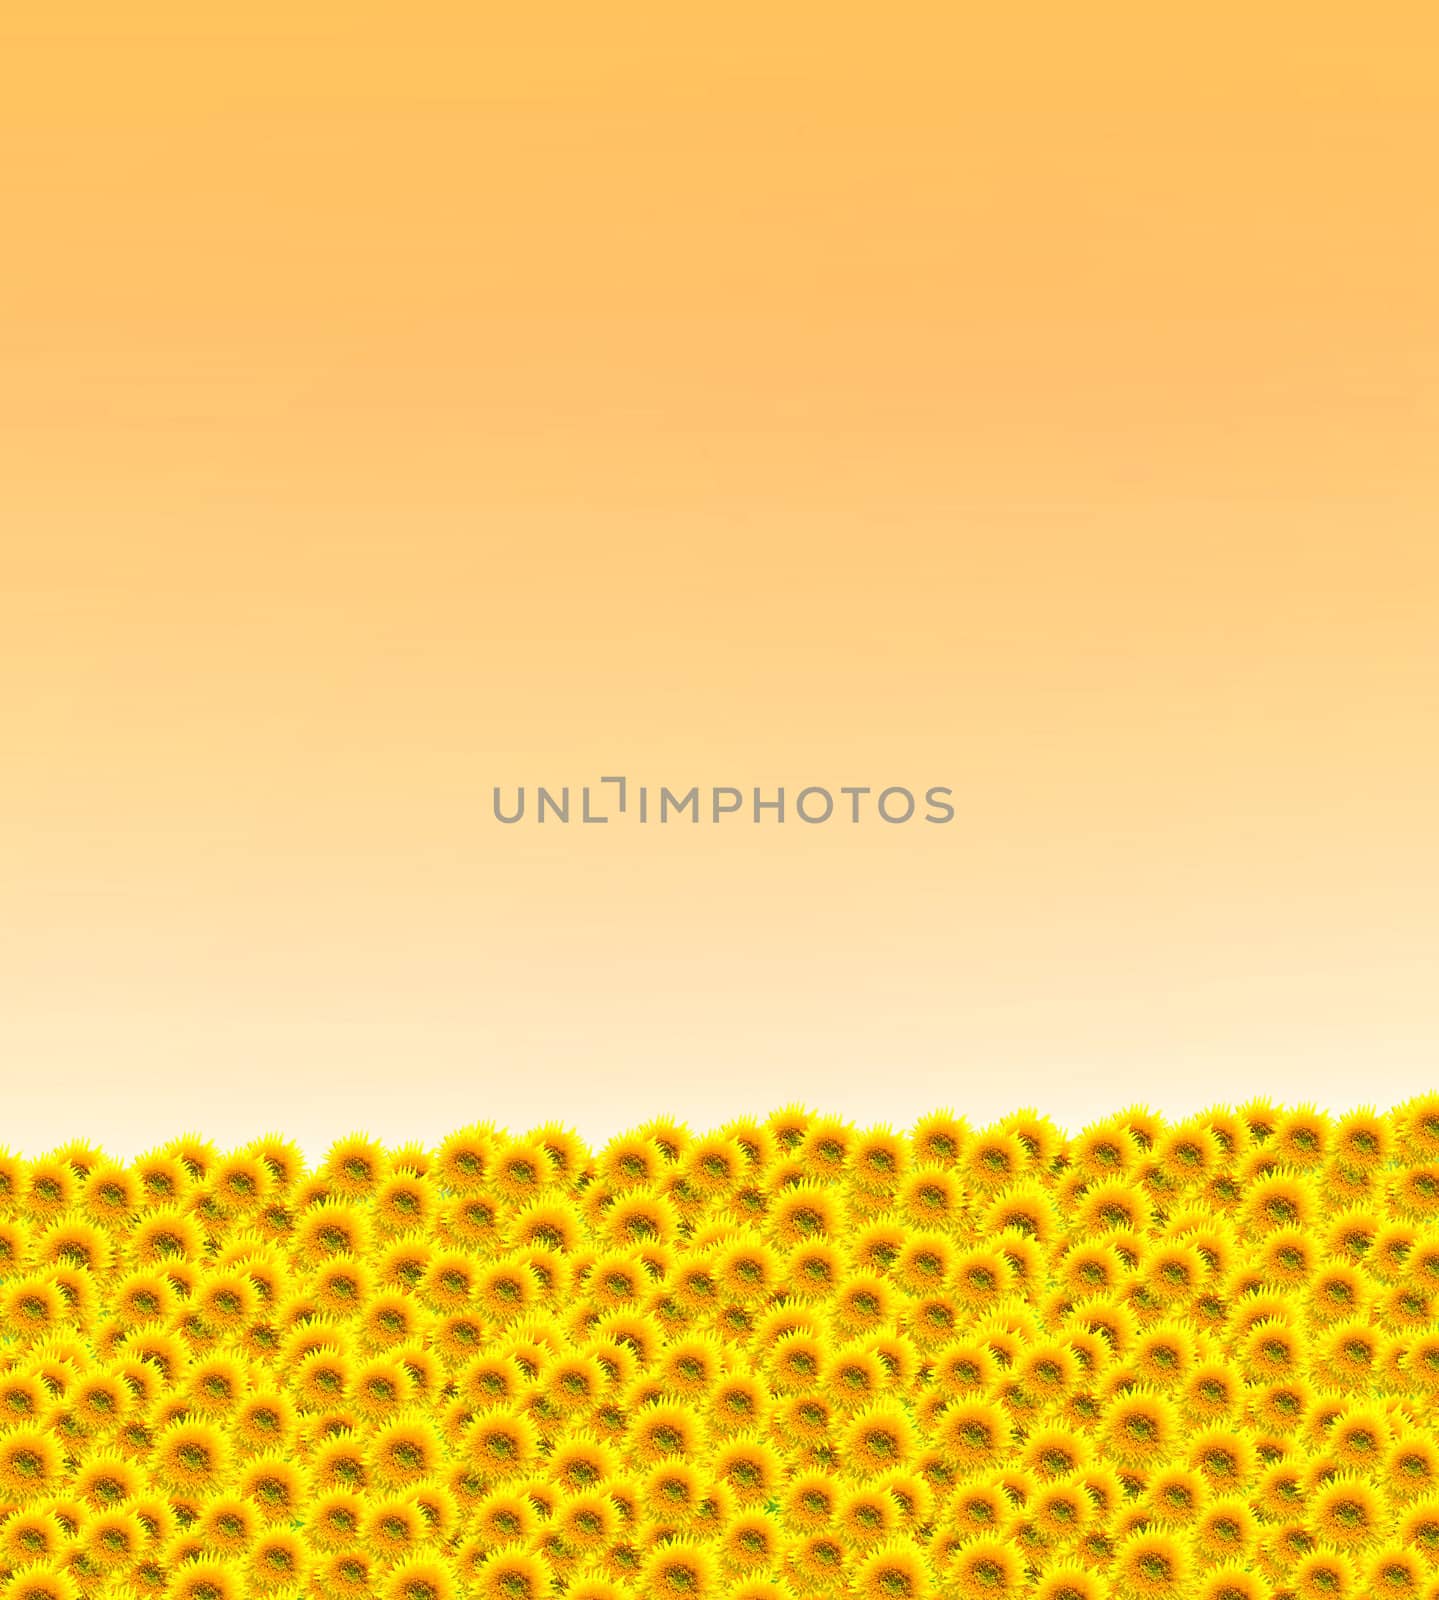 Simple beautiful horizon background with a lot of daisies and an orange background.